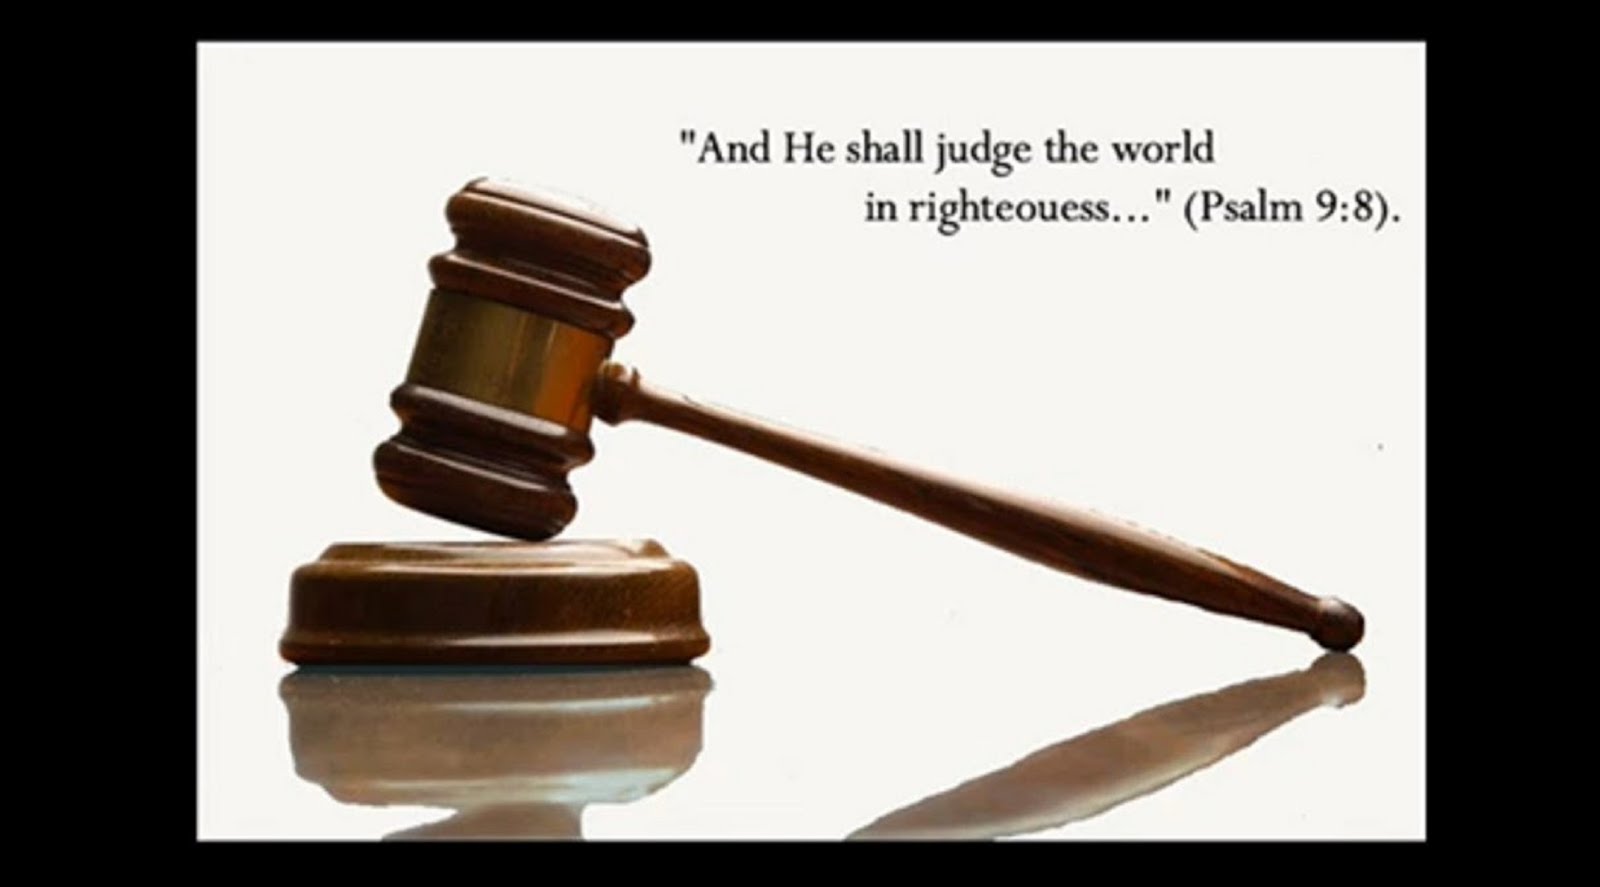 HE WILL JUDGE THE WORLD IN RIGHTEOUNESS